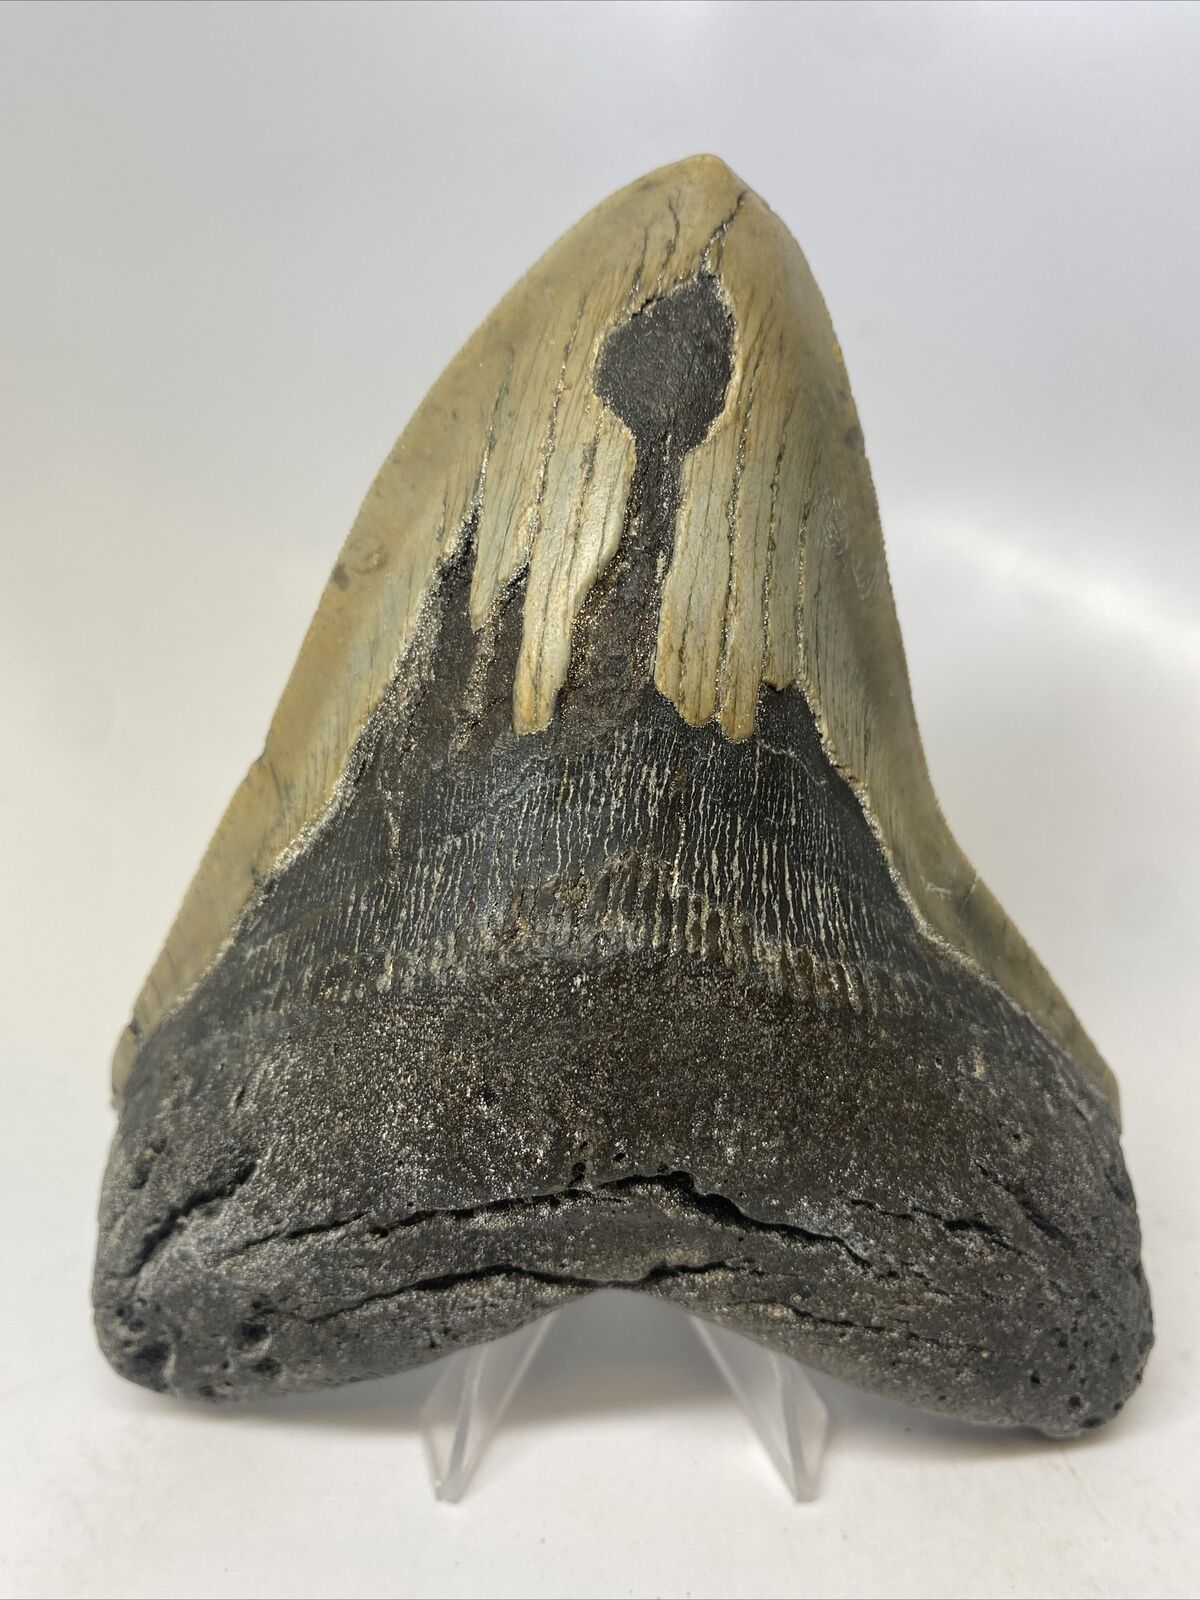 Megalodon Shark Tooth 5.55” Huge - Beautiful Fossil - Authentic 14854